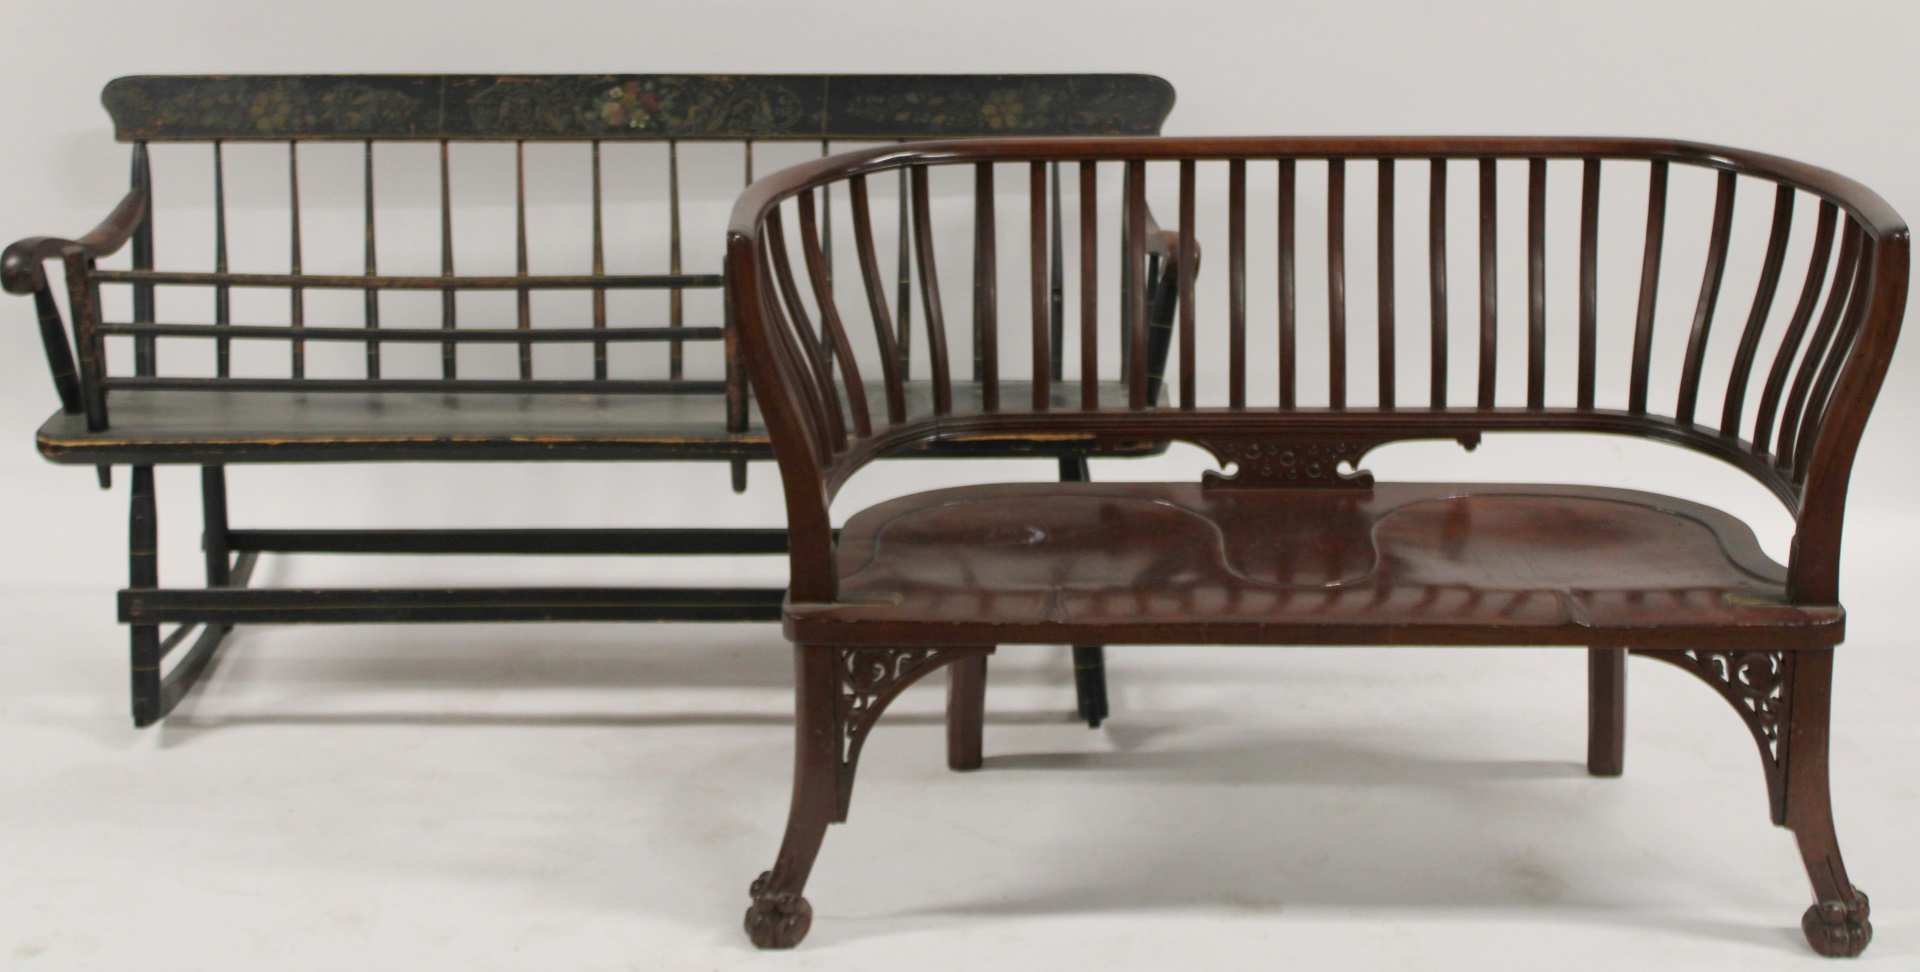 2 ANTIQUE WOOD BENCHES. To include